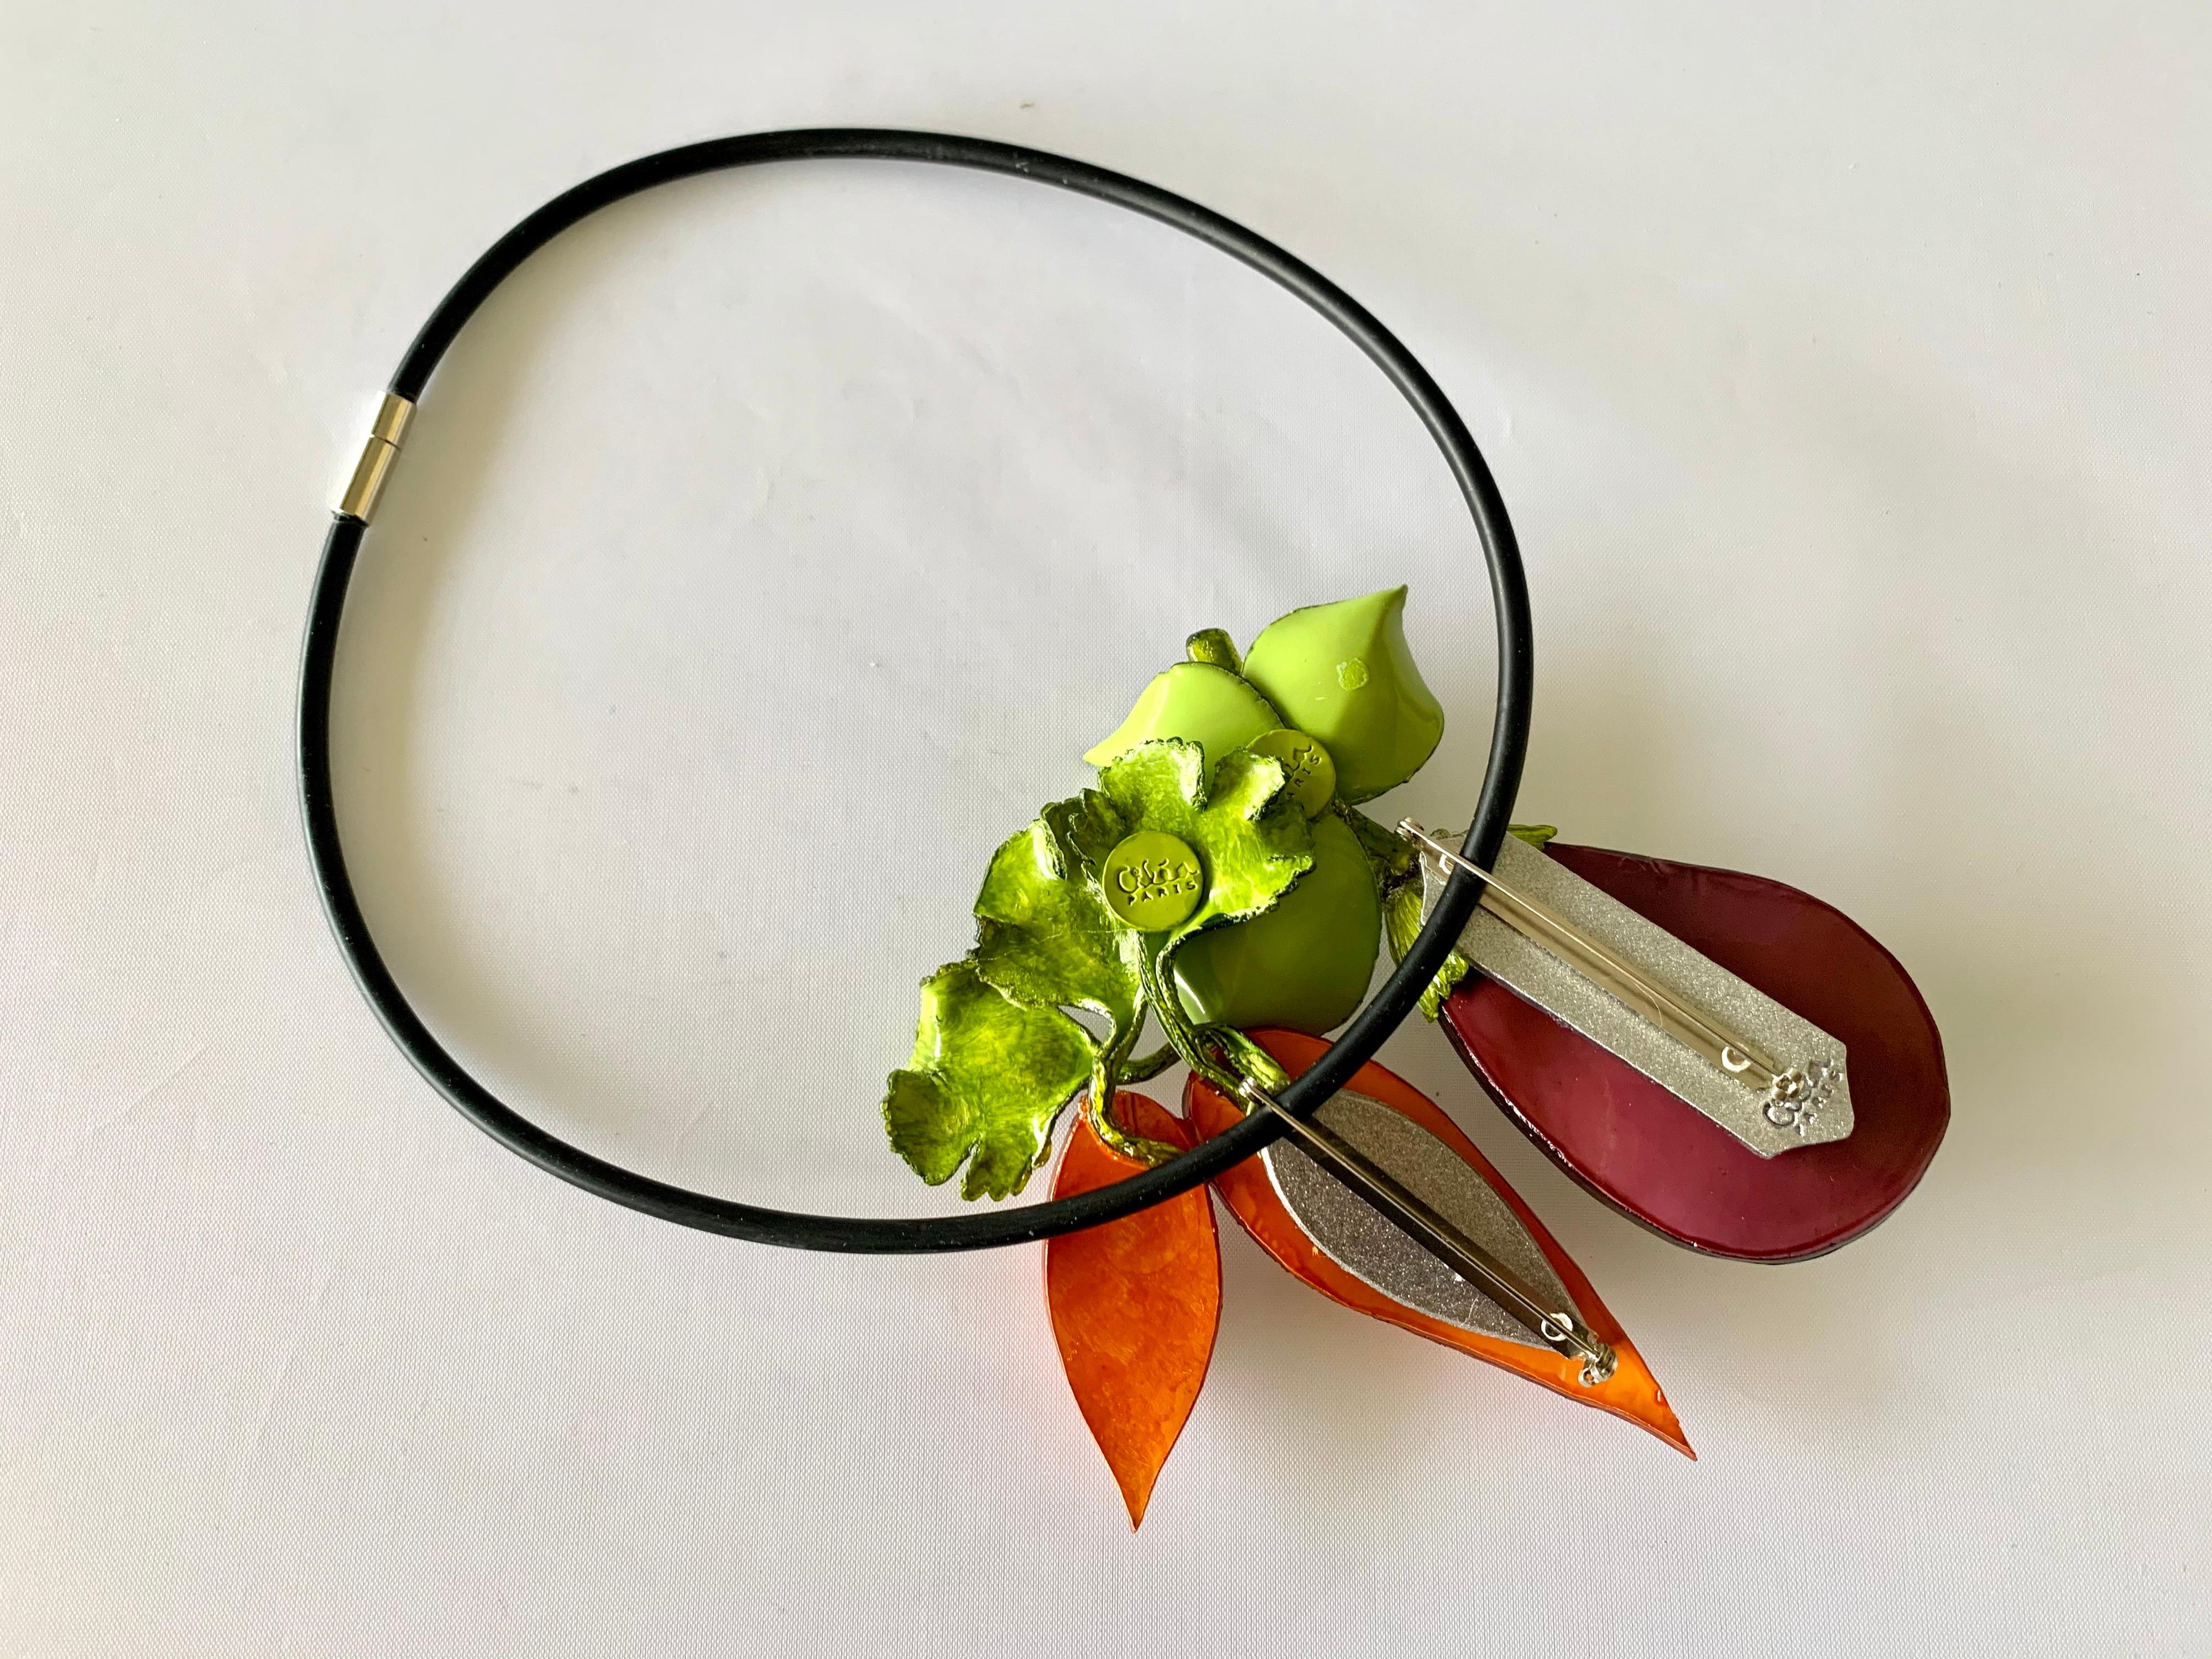 Women's Contemporary French Designer Vegetable Statement Necklace 